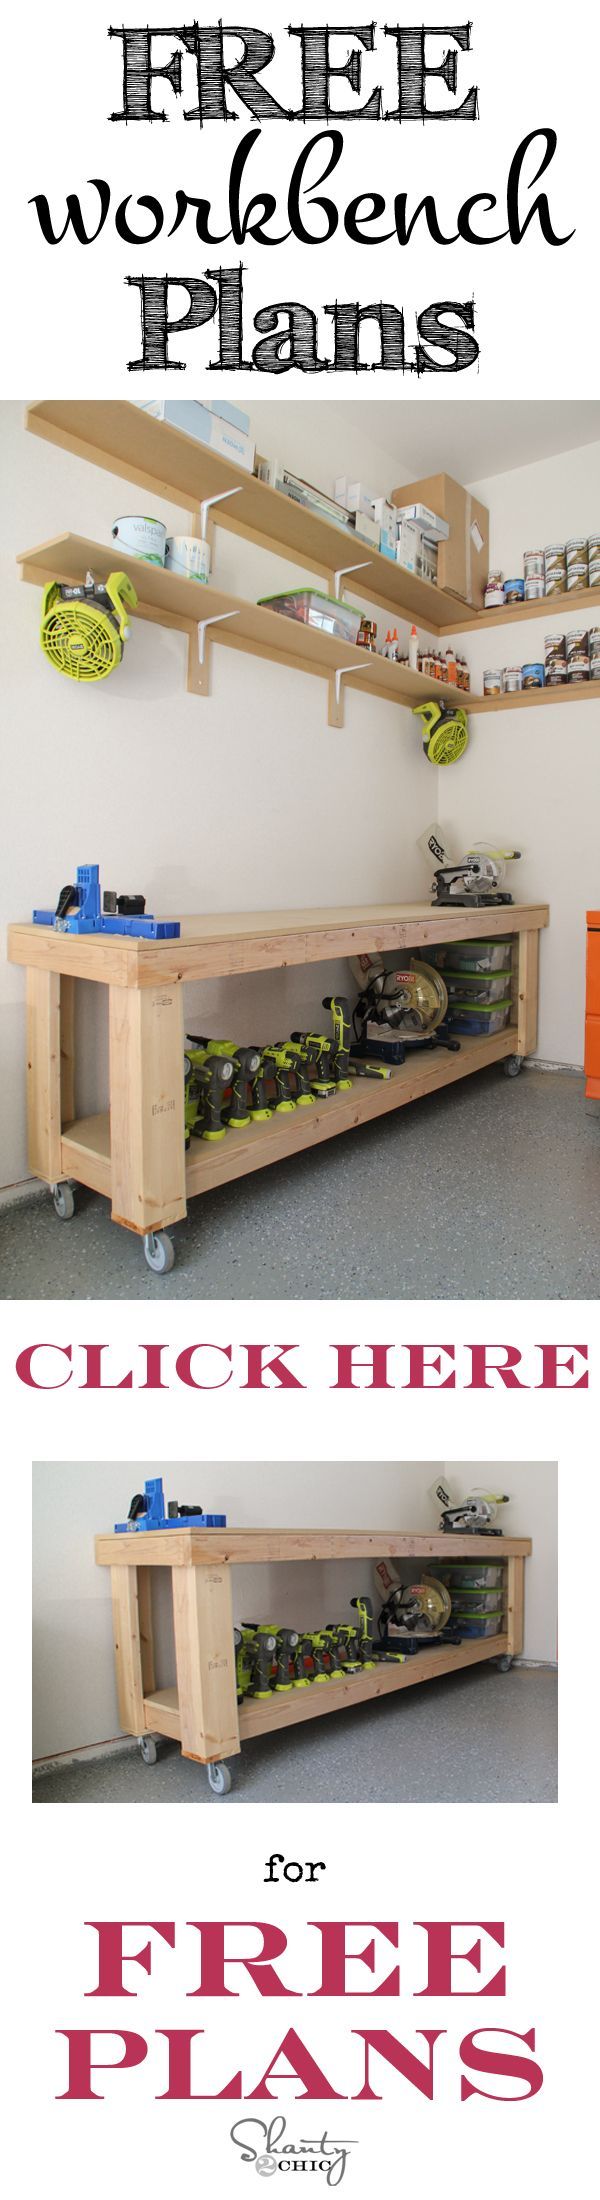 DIY Workbench plans! This is the perfect size workbench for small work spaces and it is easy to build!